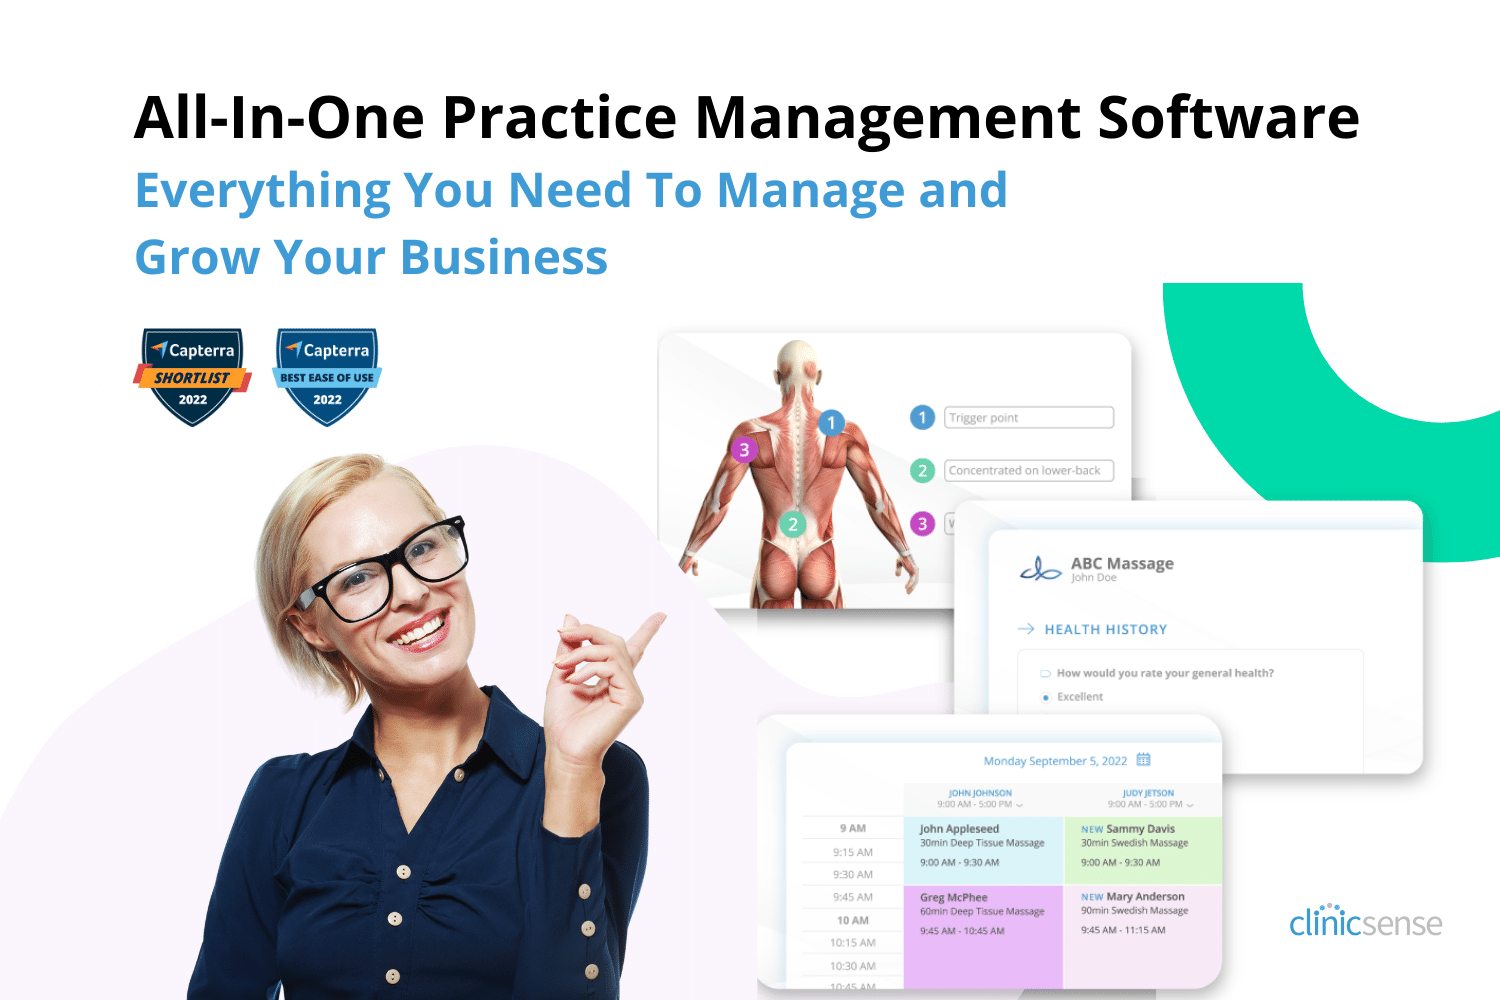 Award-winning, and used by over 7,000 Massage Therapy Practitioners and Clinics, ClinicSense offers everything you need in one place to run and grow your business with management and marketing tools all in one place!